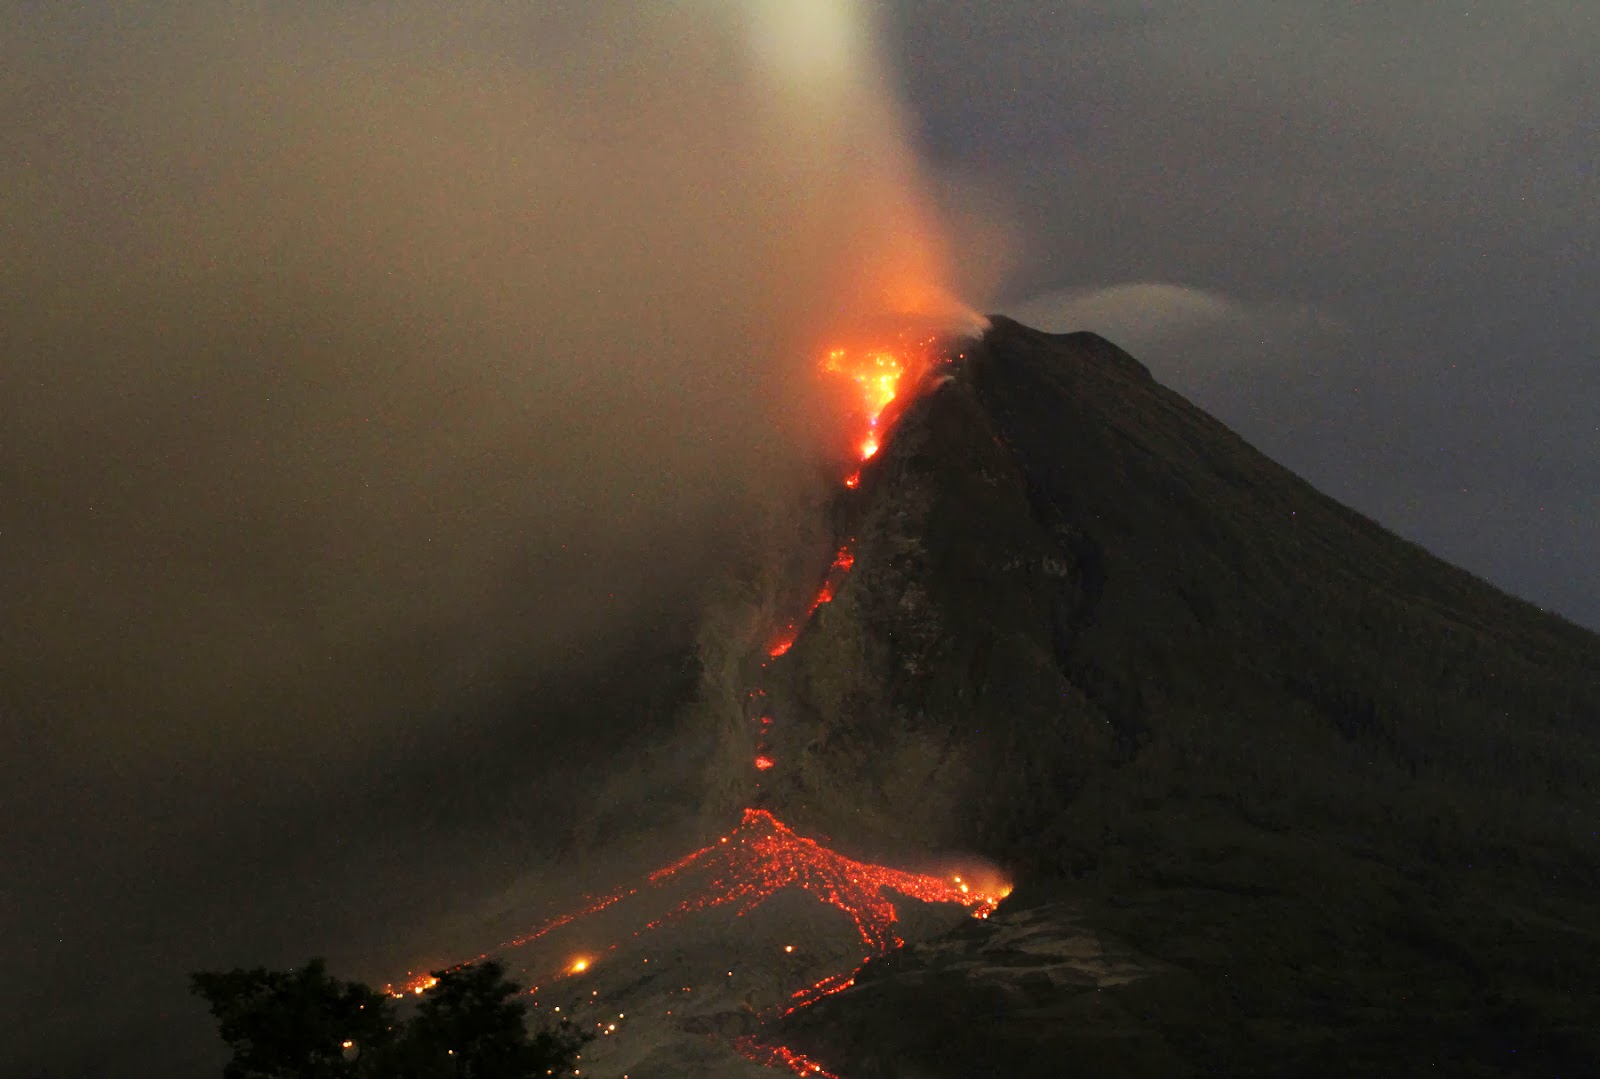 [SHARE] Volcanic Ash From Sumatra Expected To Reach Malaysia